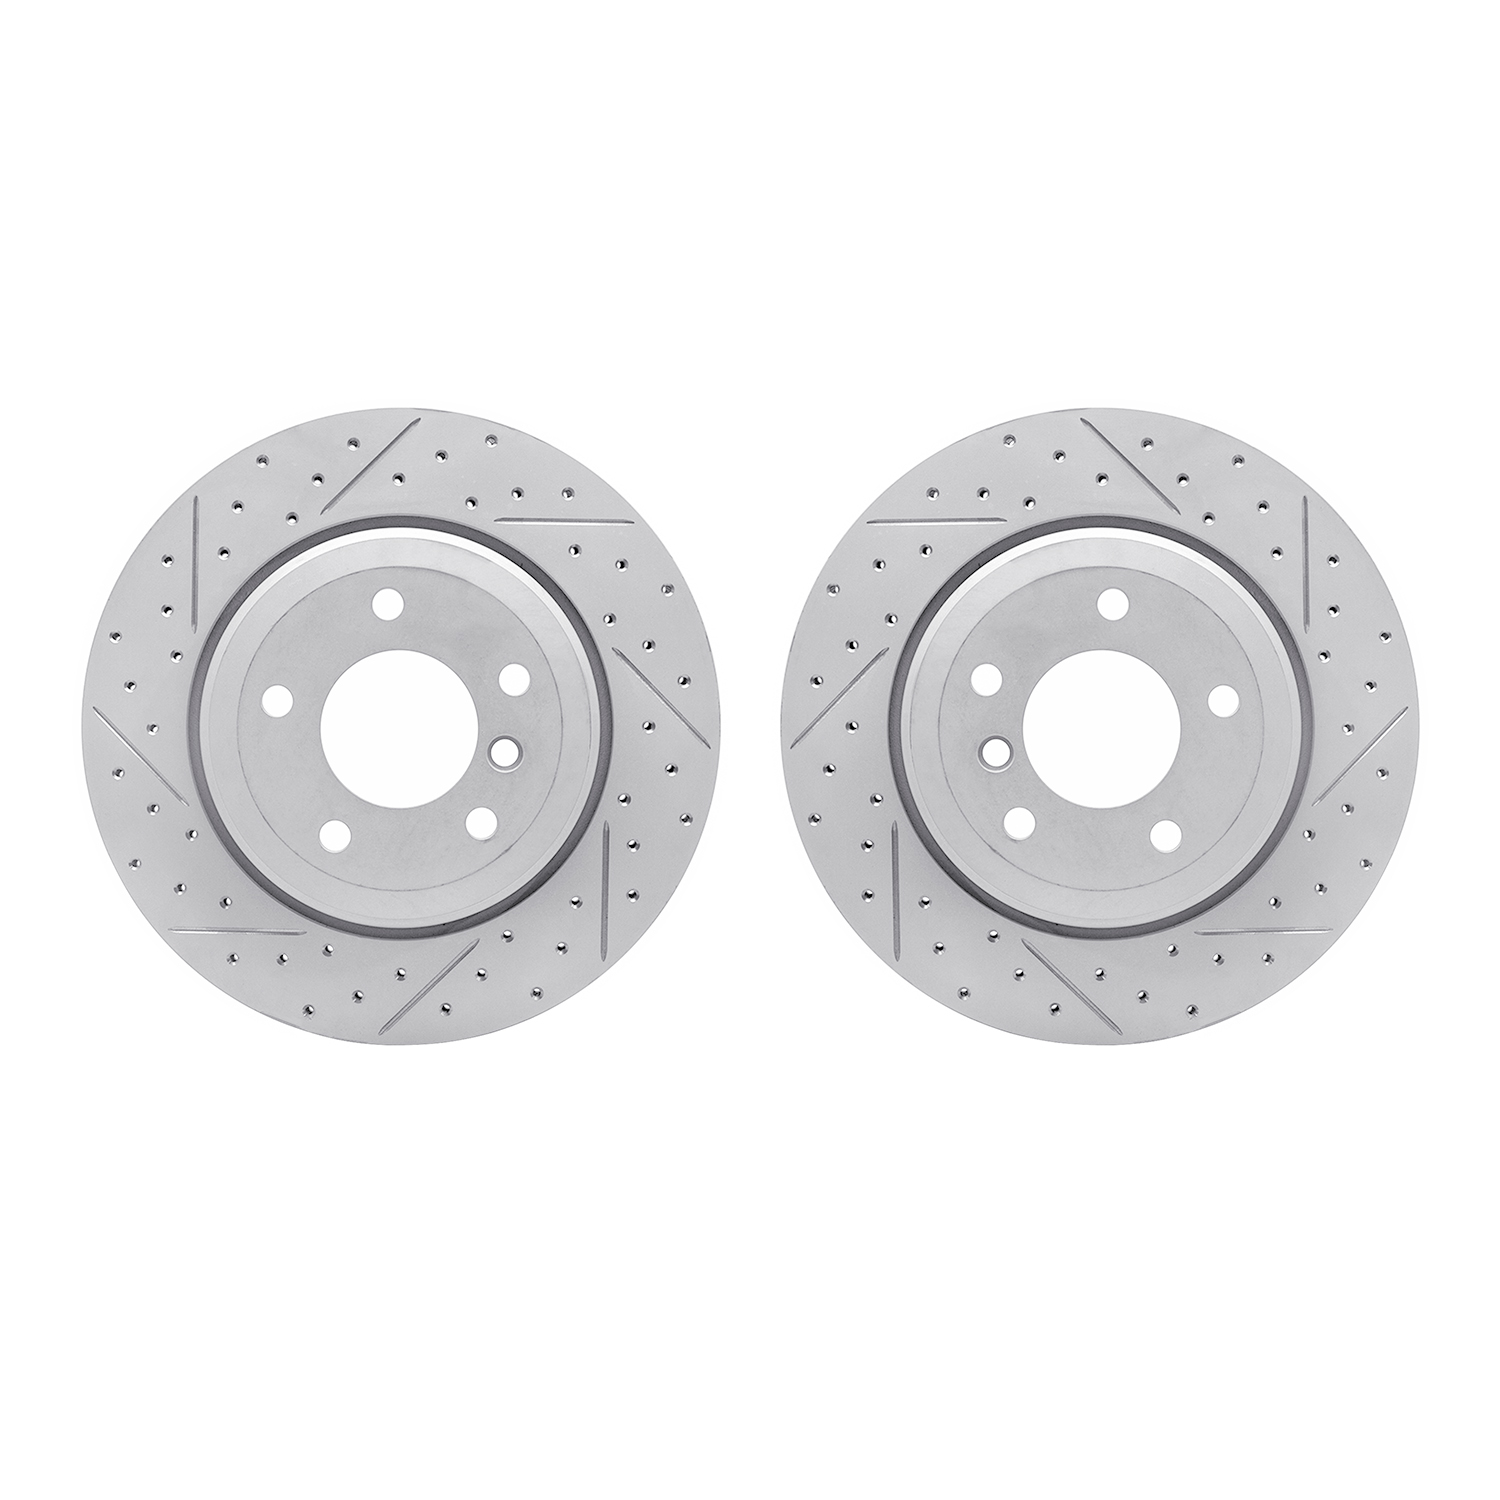 2002-31074 Geoperformance Drilled/Slotted Brake Rotors, 2004-2010 BMW, Position: Rear